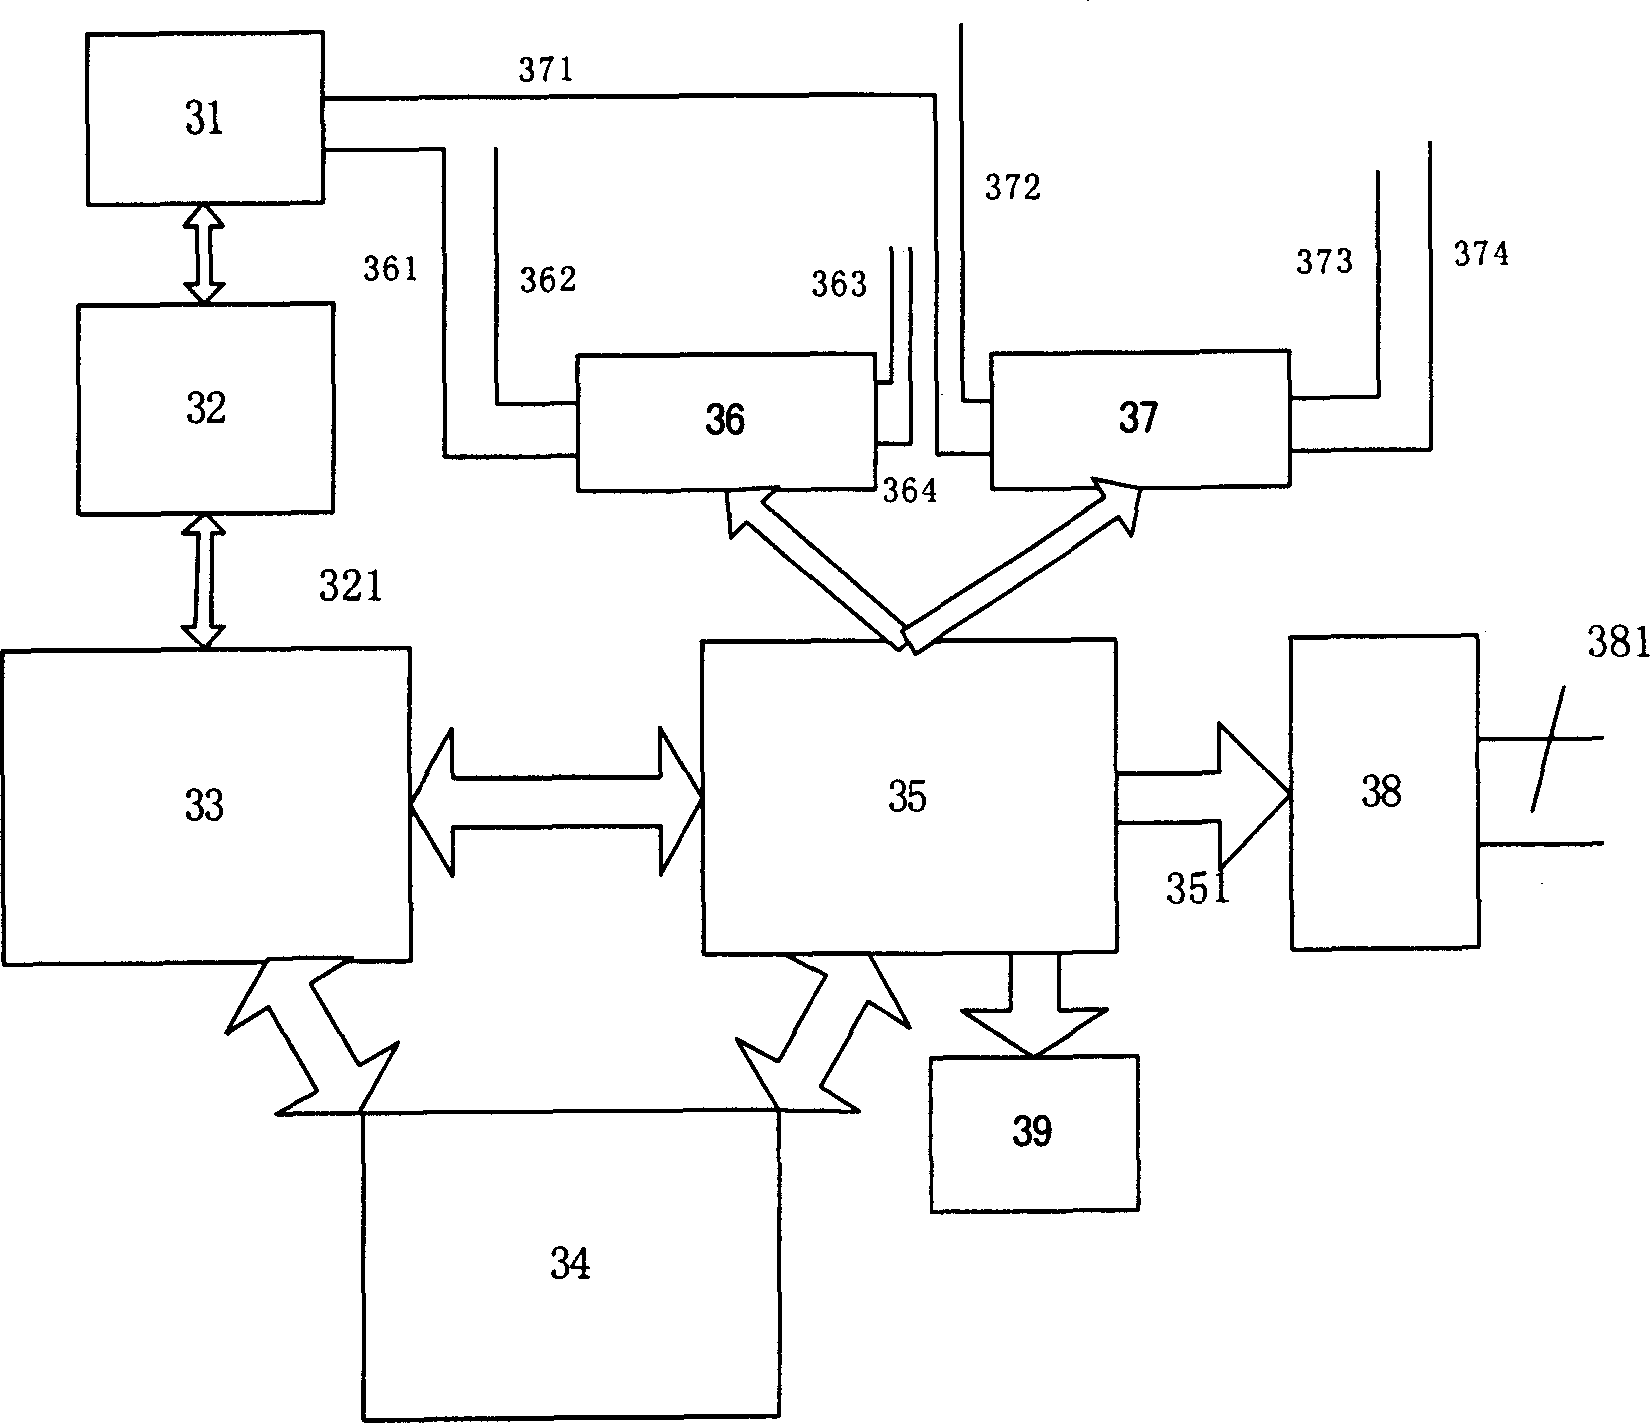 Light path automatic switching system